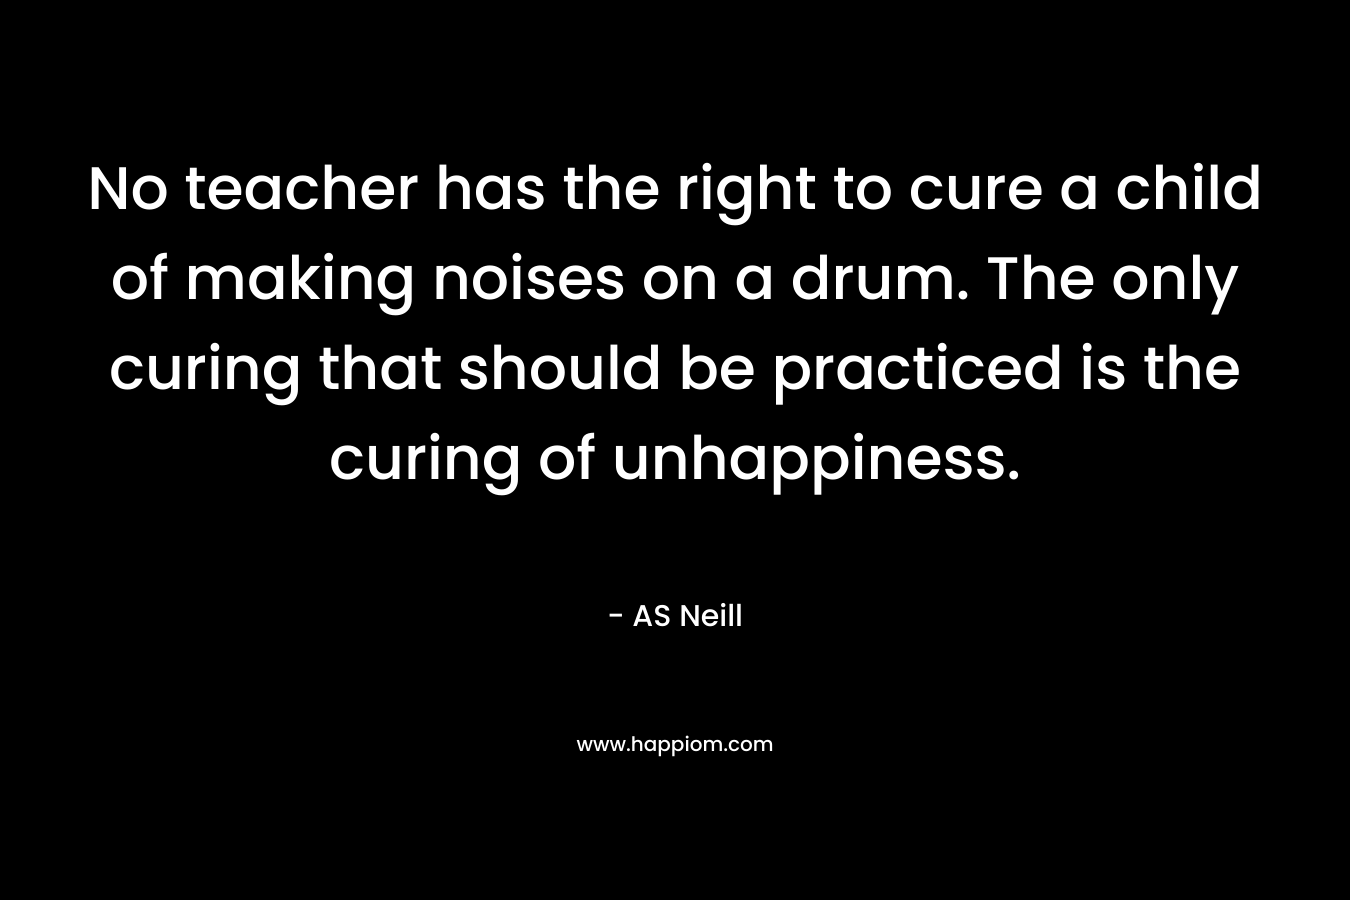 No teacher has the right to cure a child of making noises on a drum. The only curing that should be practiced is the curing of unhappiness. – AS Neill